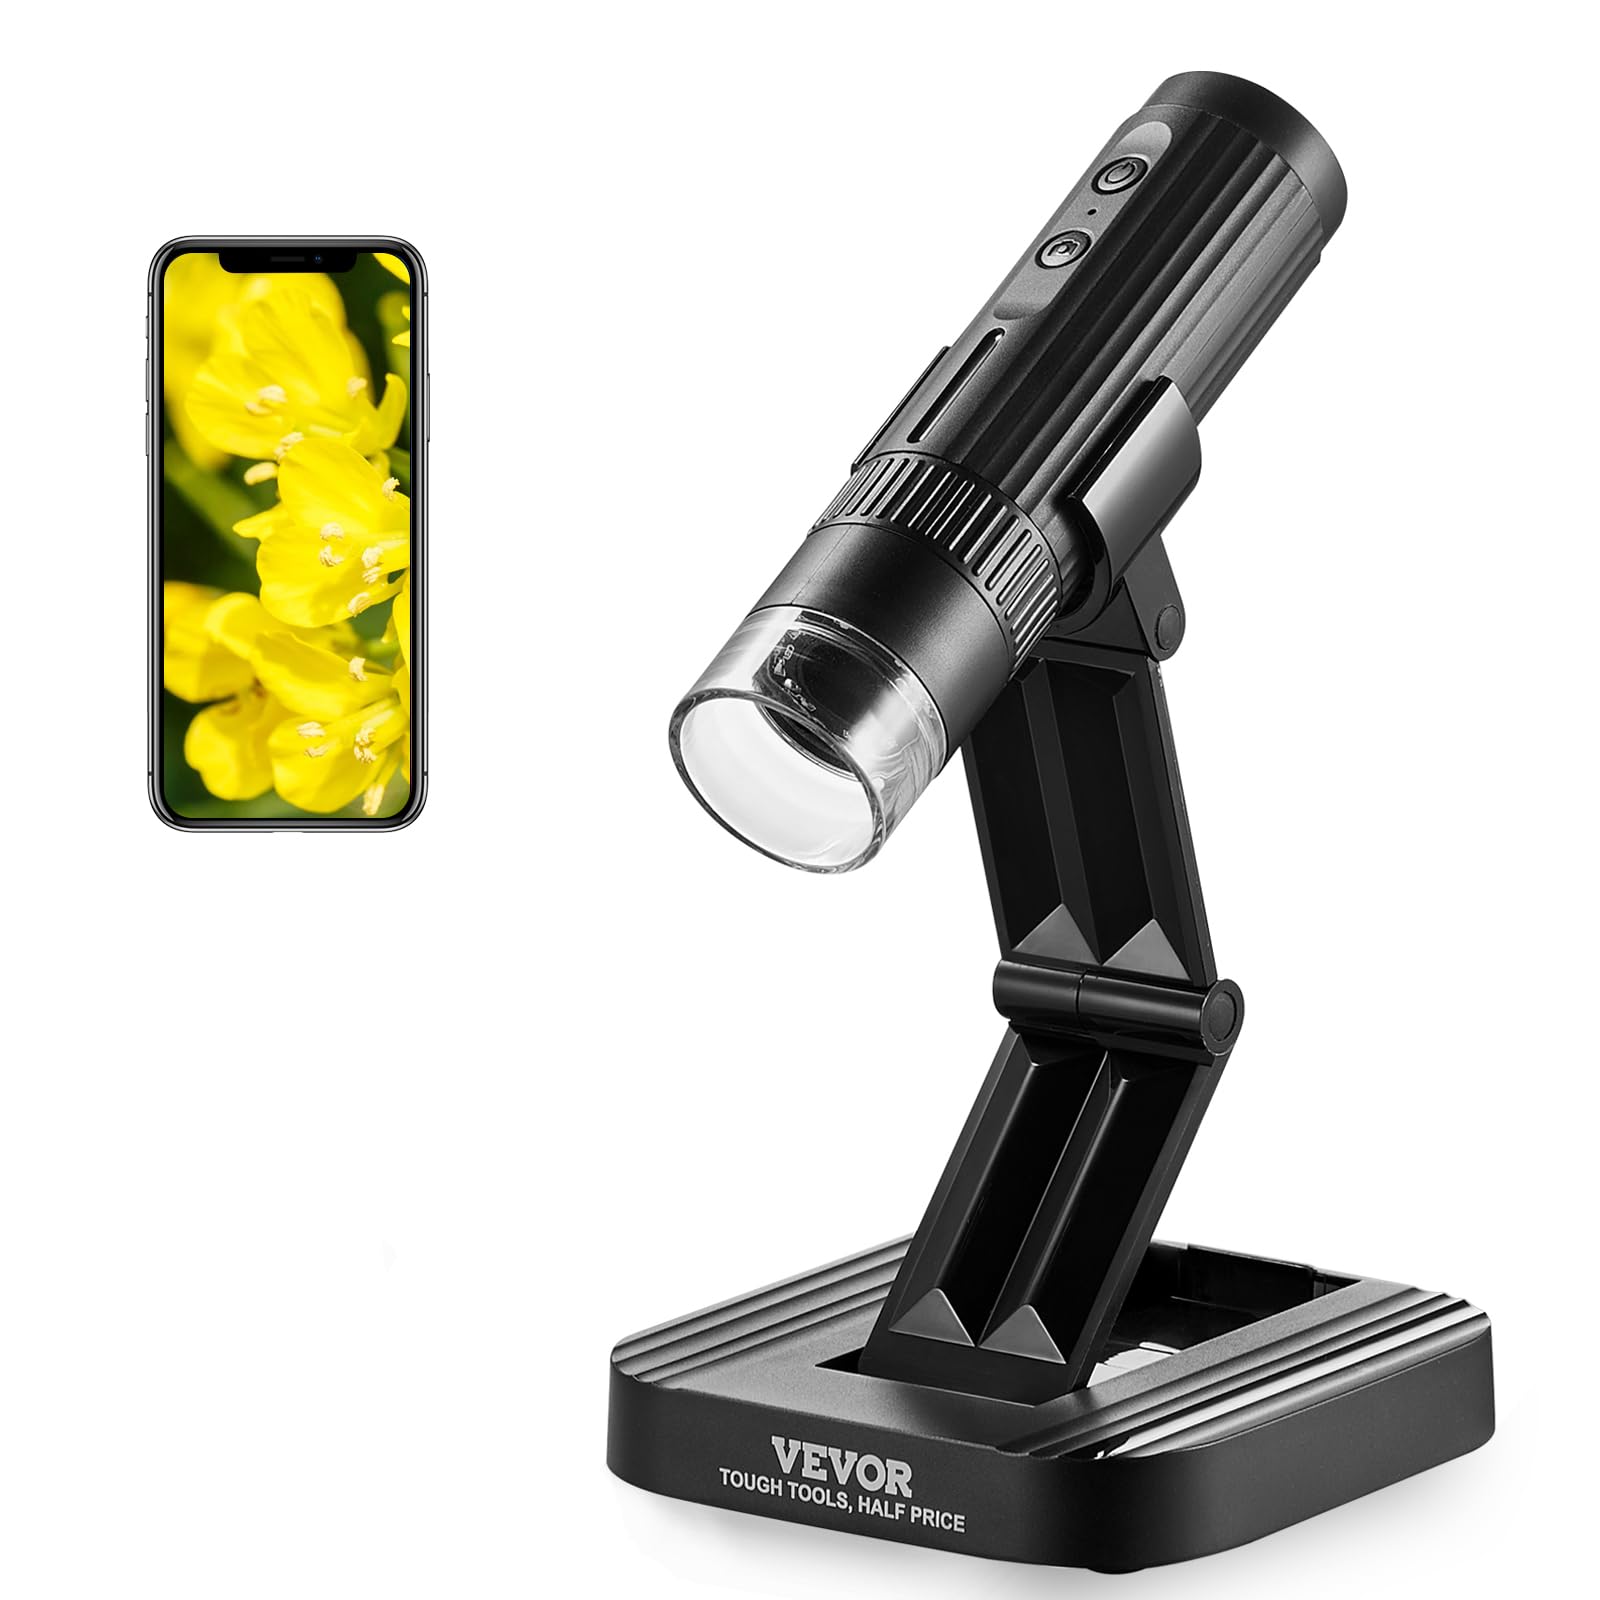 VEVOR Wireless Digital Microscope 50X-1000X 1080P HD WiFi Portable Handheld Mini Coin Microscope with Adjustable Stand USB Microscope Camera Magnifier Compatible with iPhone iPad Android Phone & PC